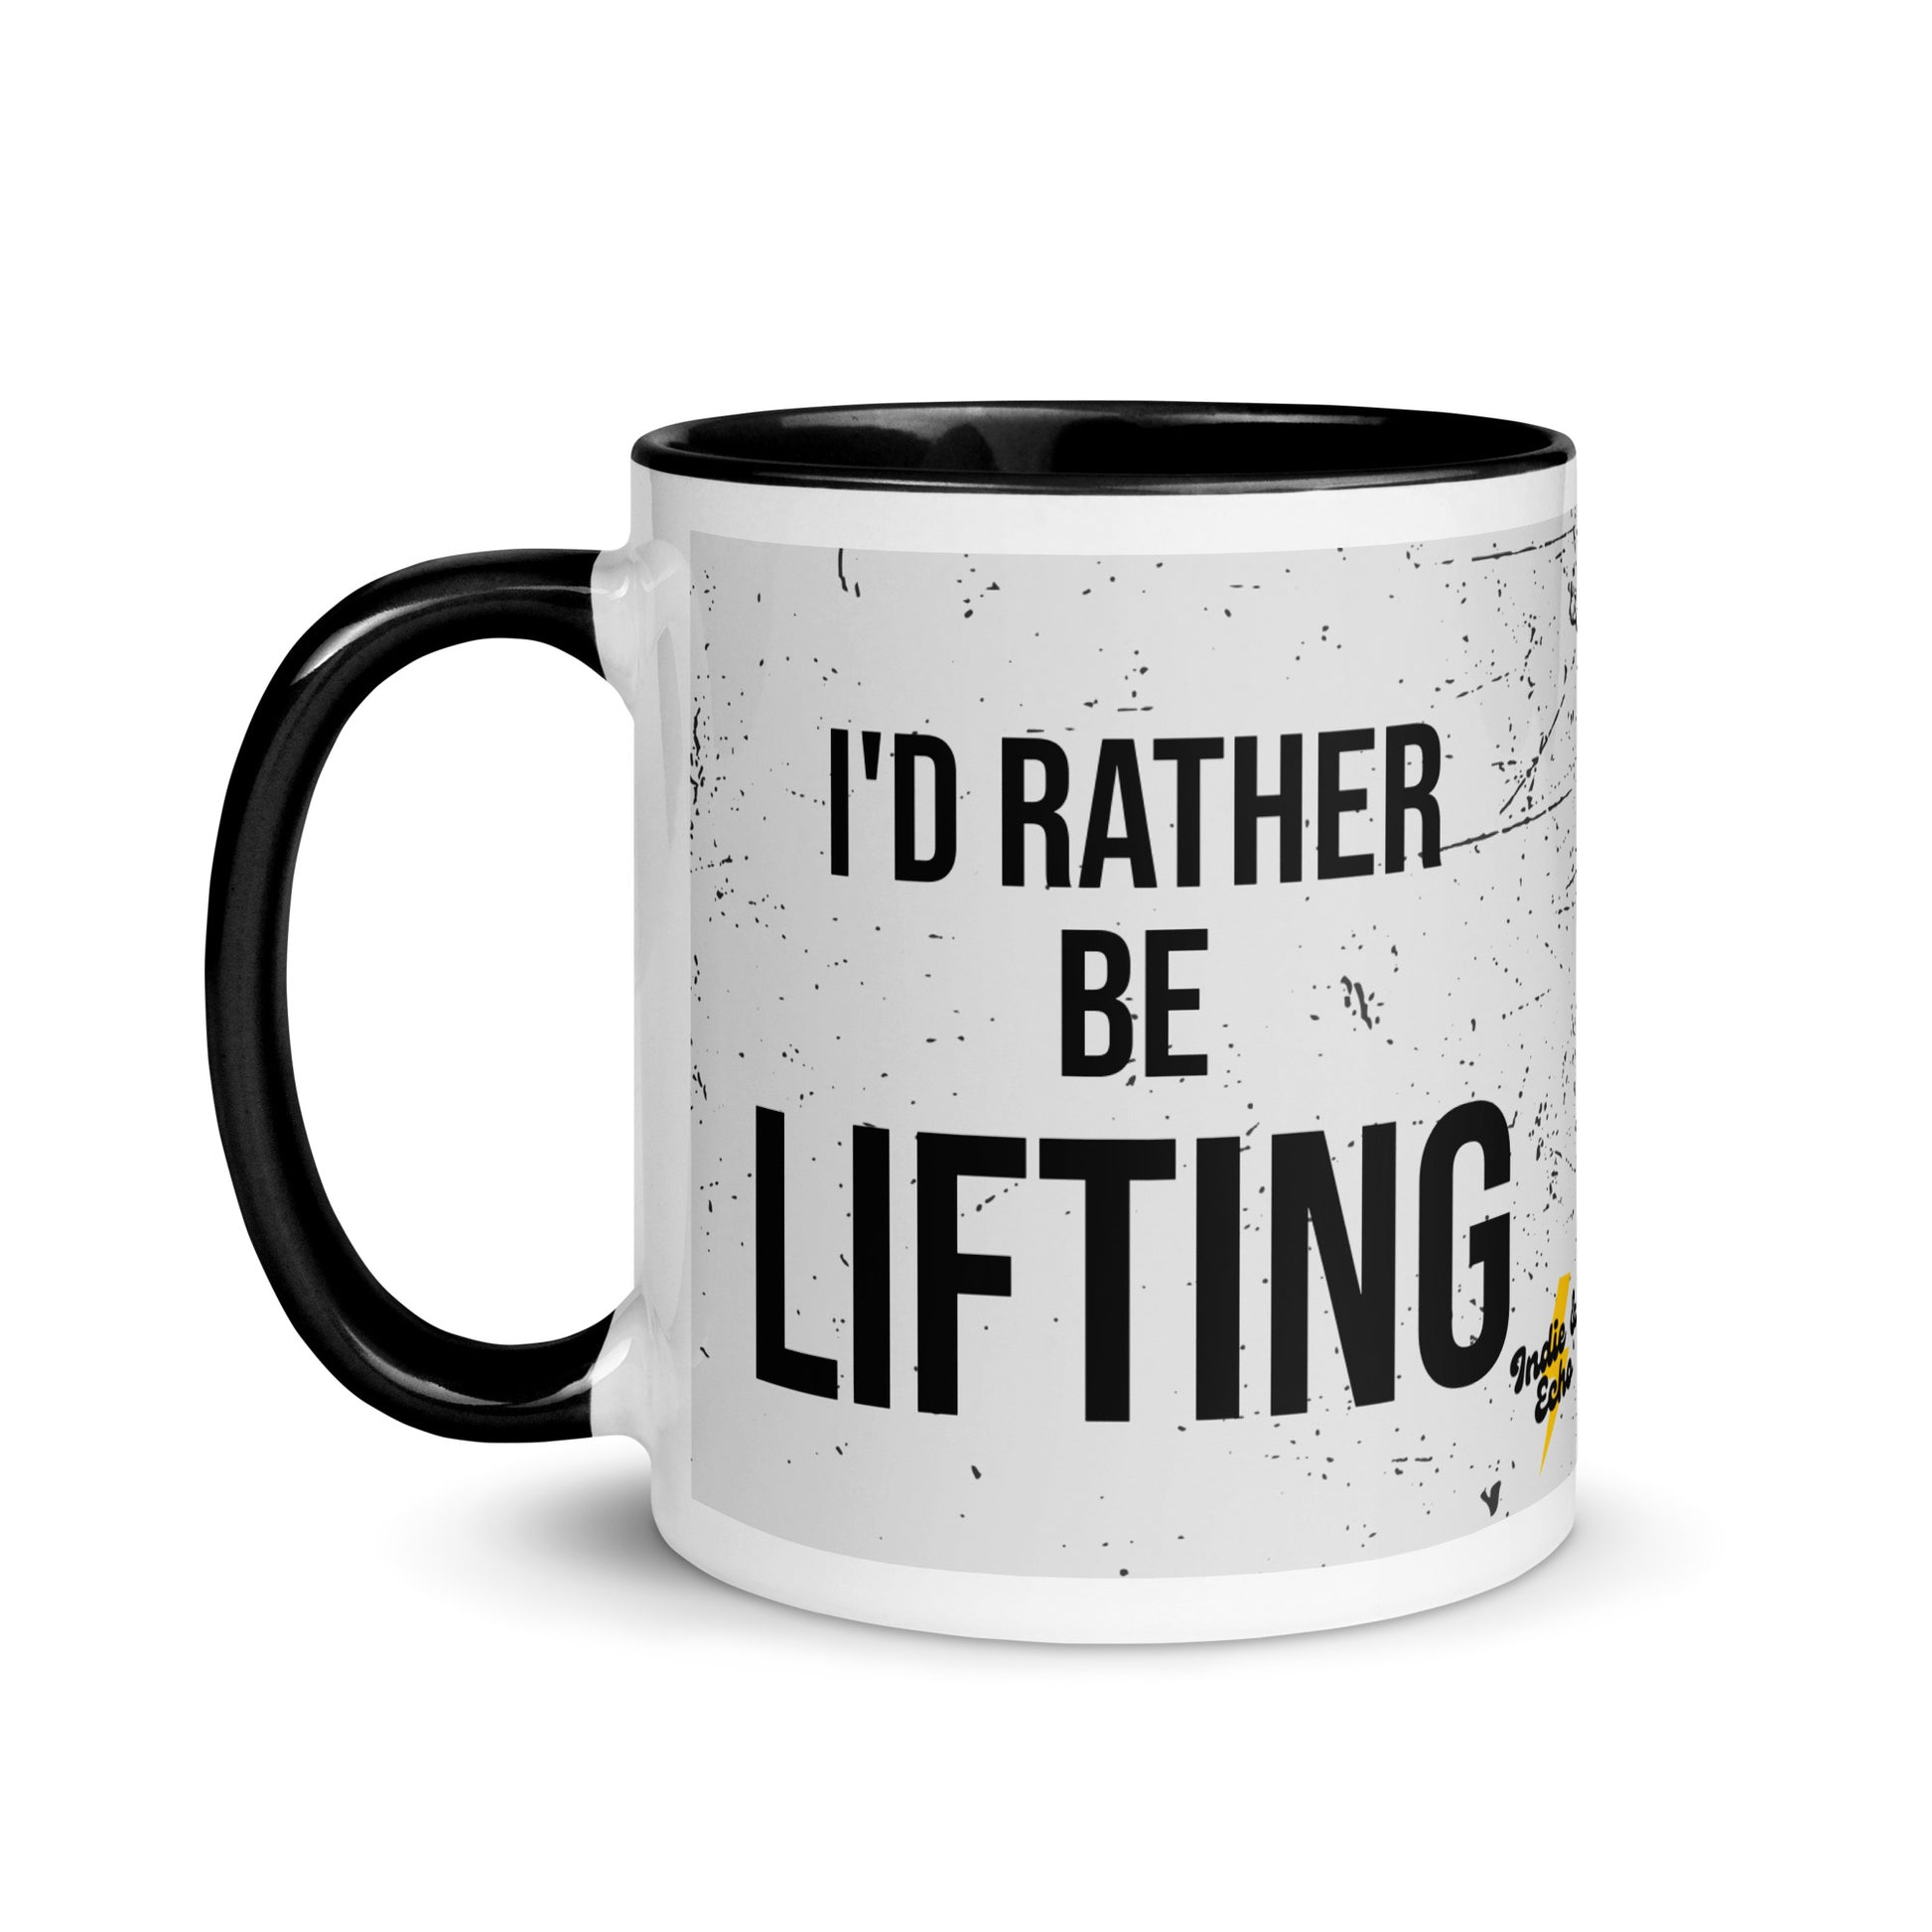 Black handled mug with I'd rather be lifting written on it, across a grey splatter background. A gift for someone who loves the gym.